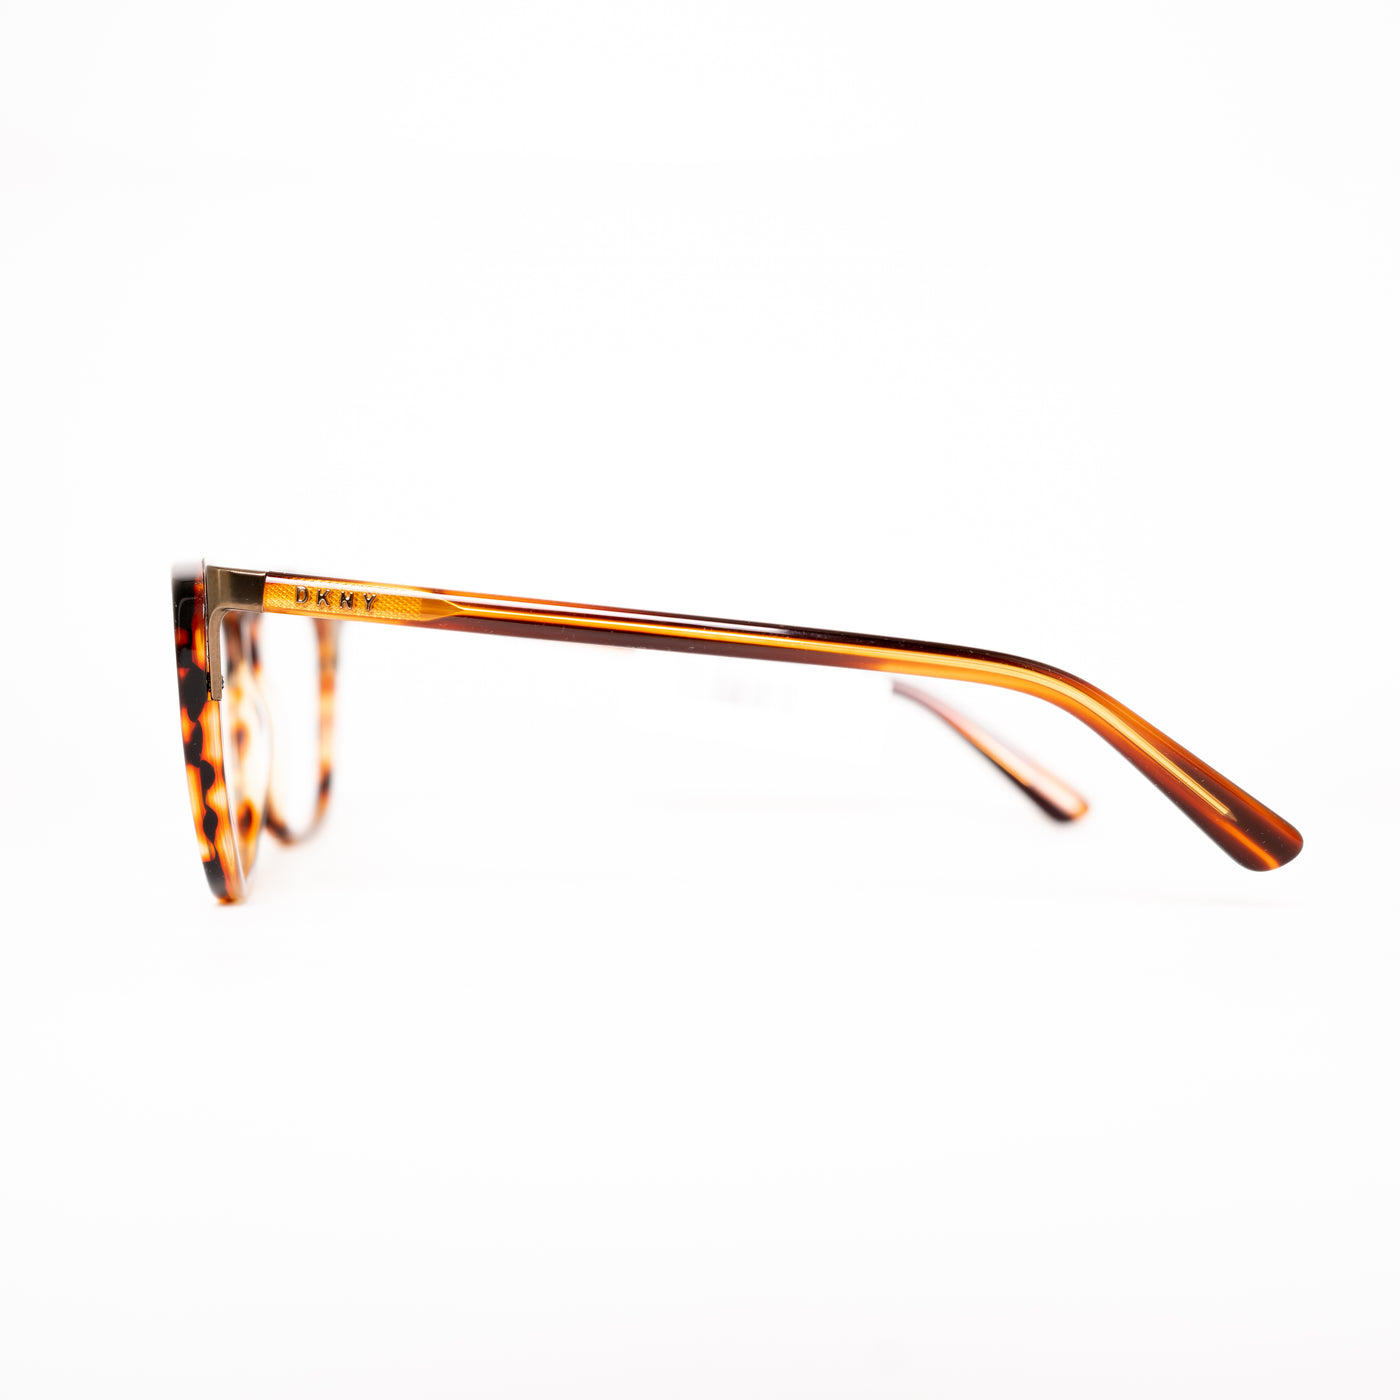 Dkny Eyeglasses | DY4680/3782 - Vision Express Optical Philippines